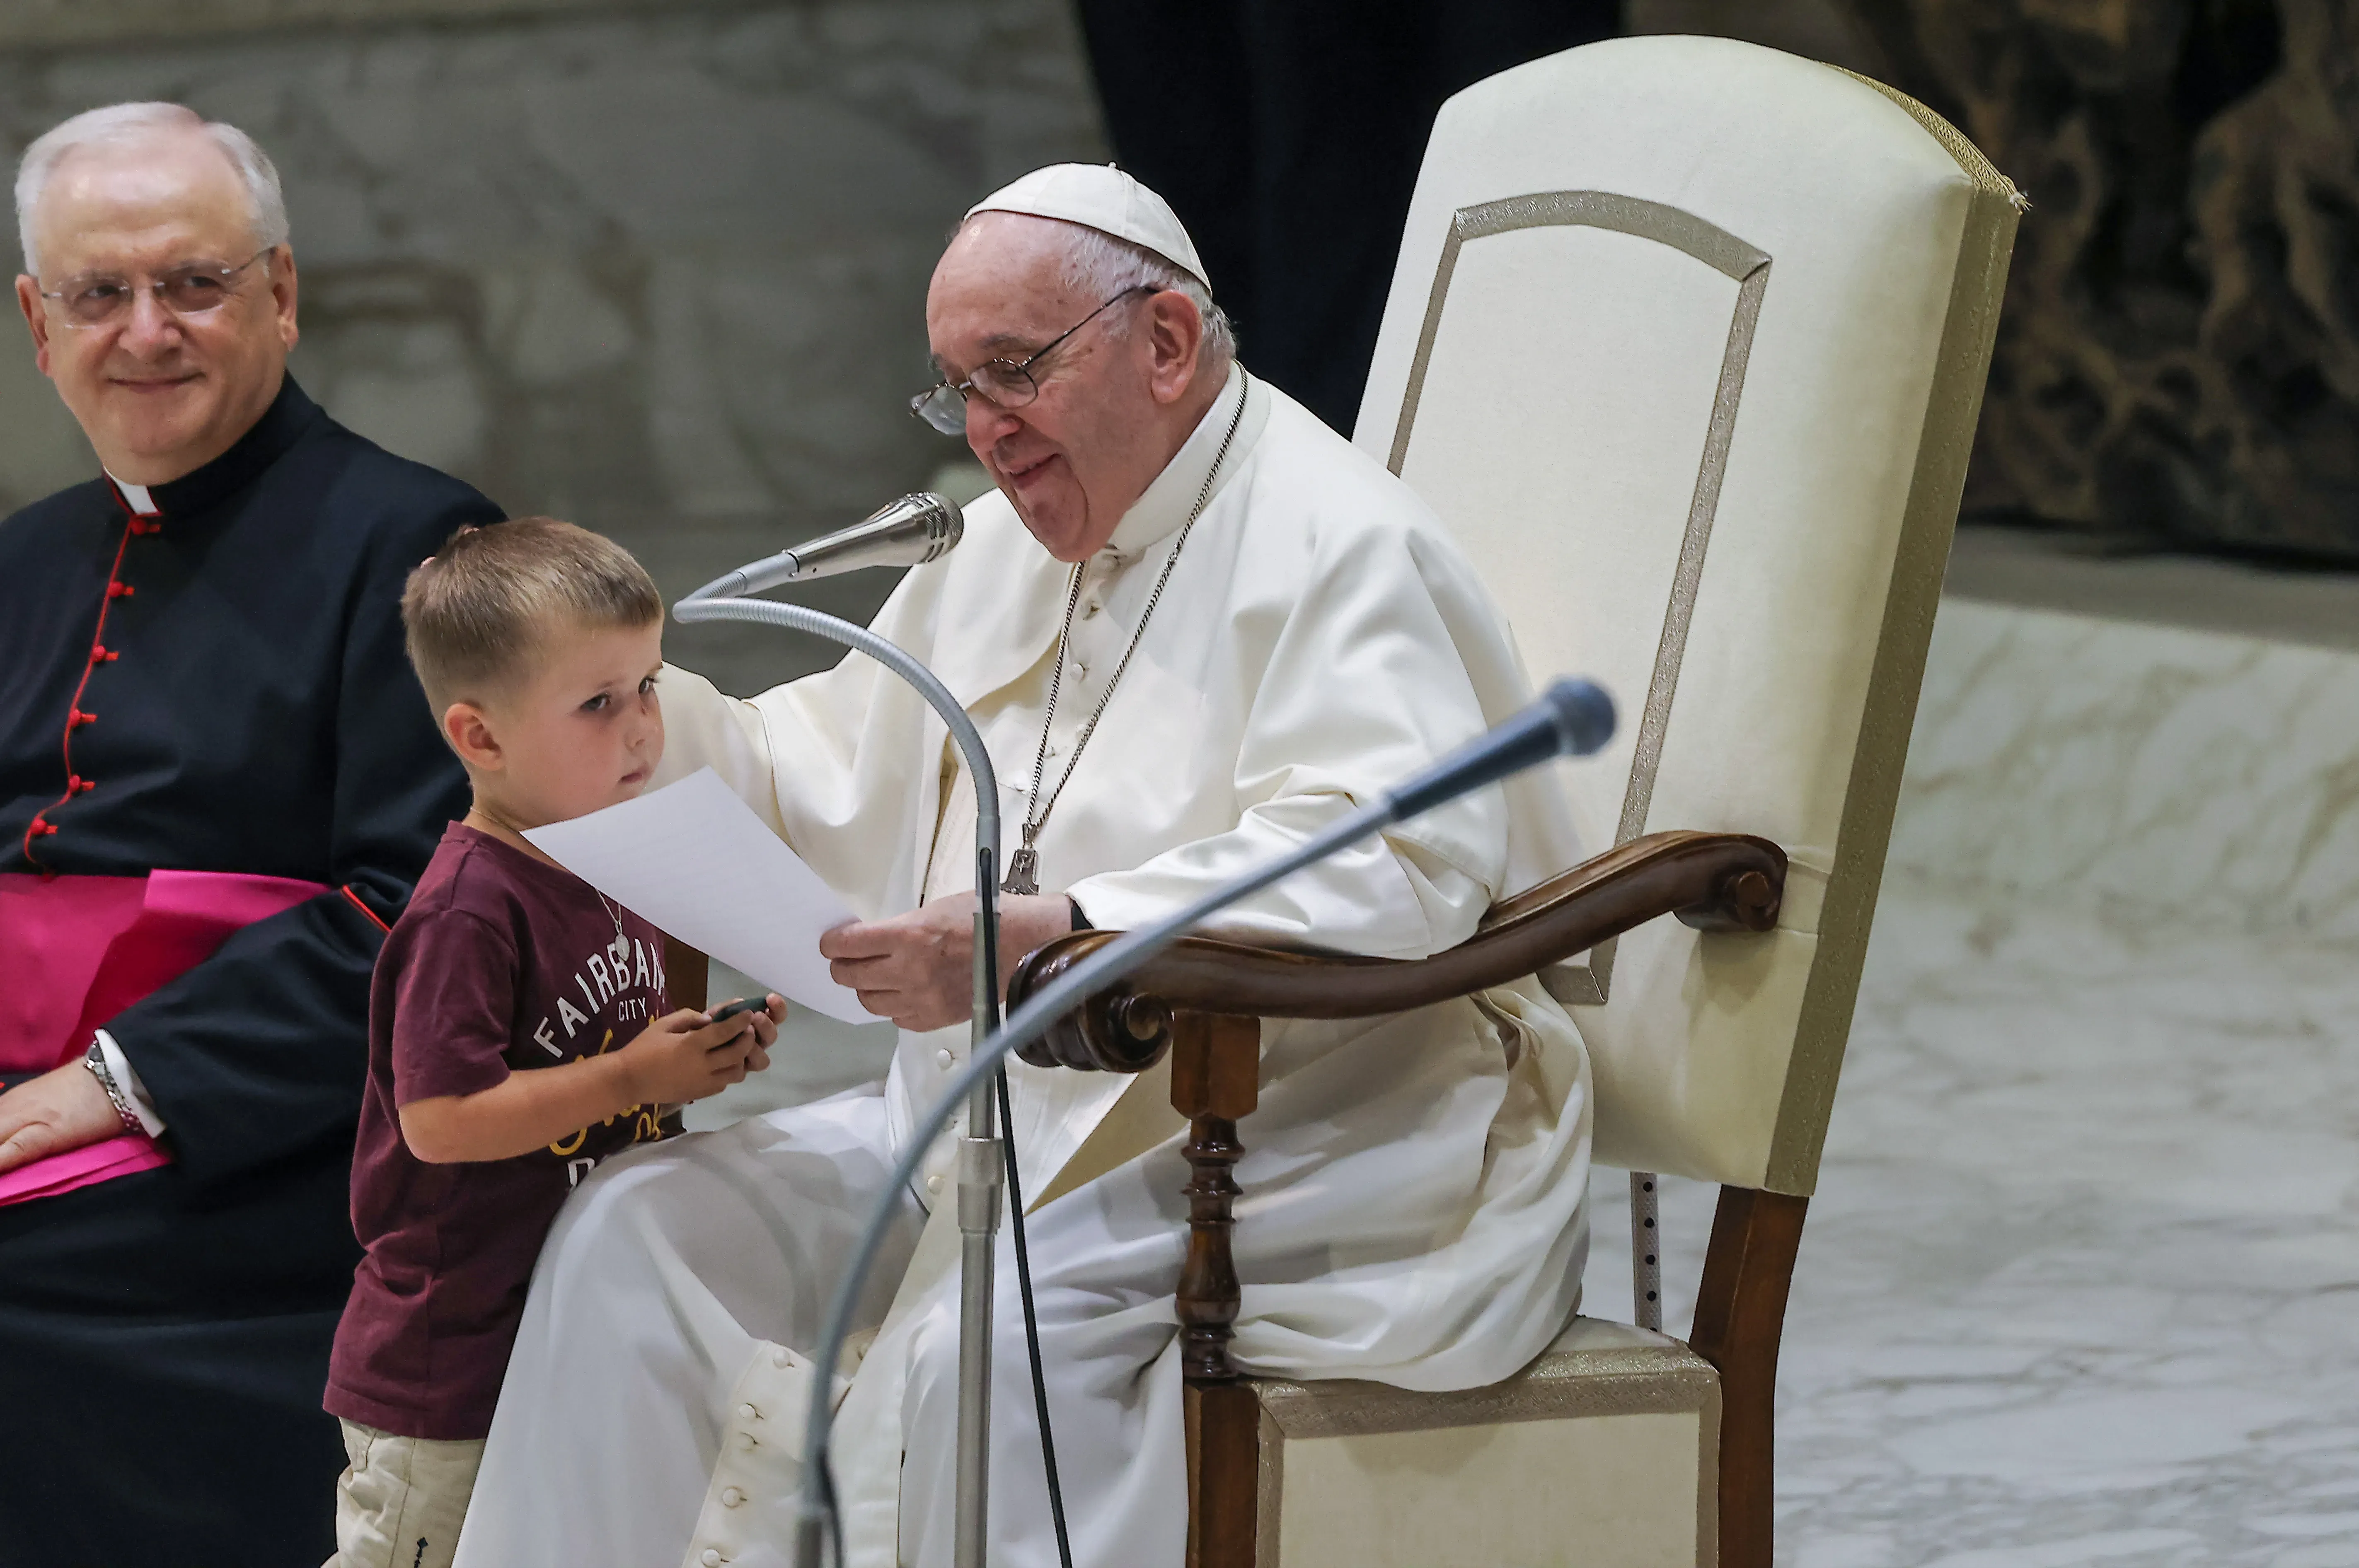 Pope Francis with a surprise visitor on stage at the General Audience in the Vatican on Aug. 17, 2022. Pablo Esparza / CNA